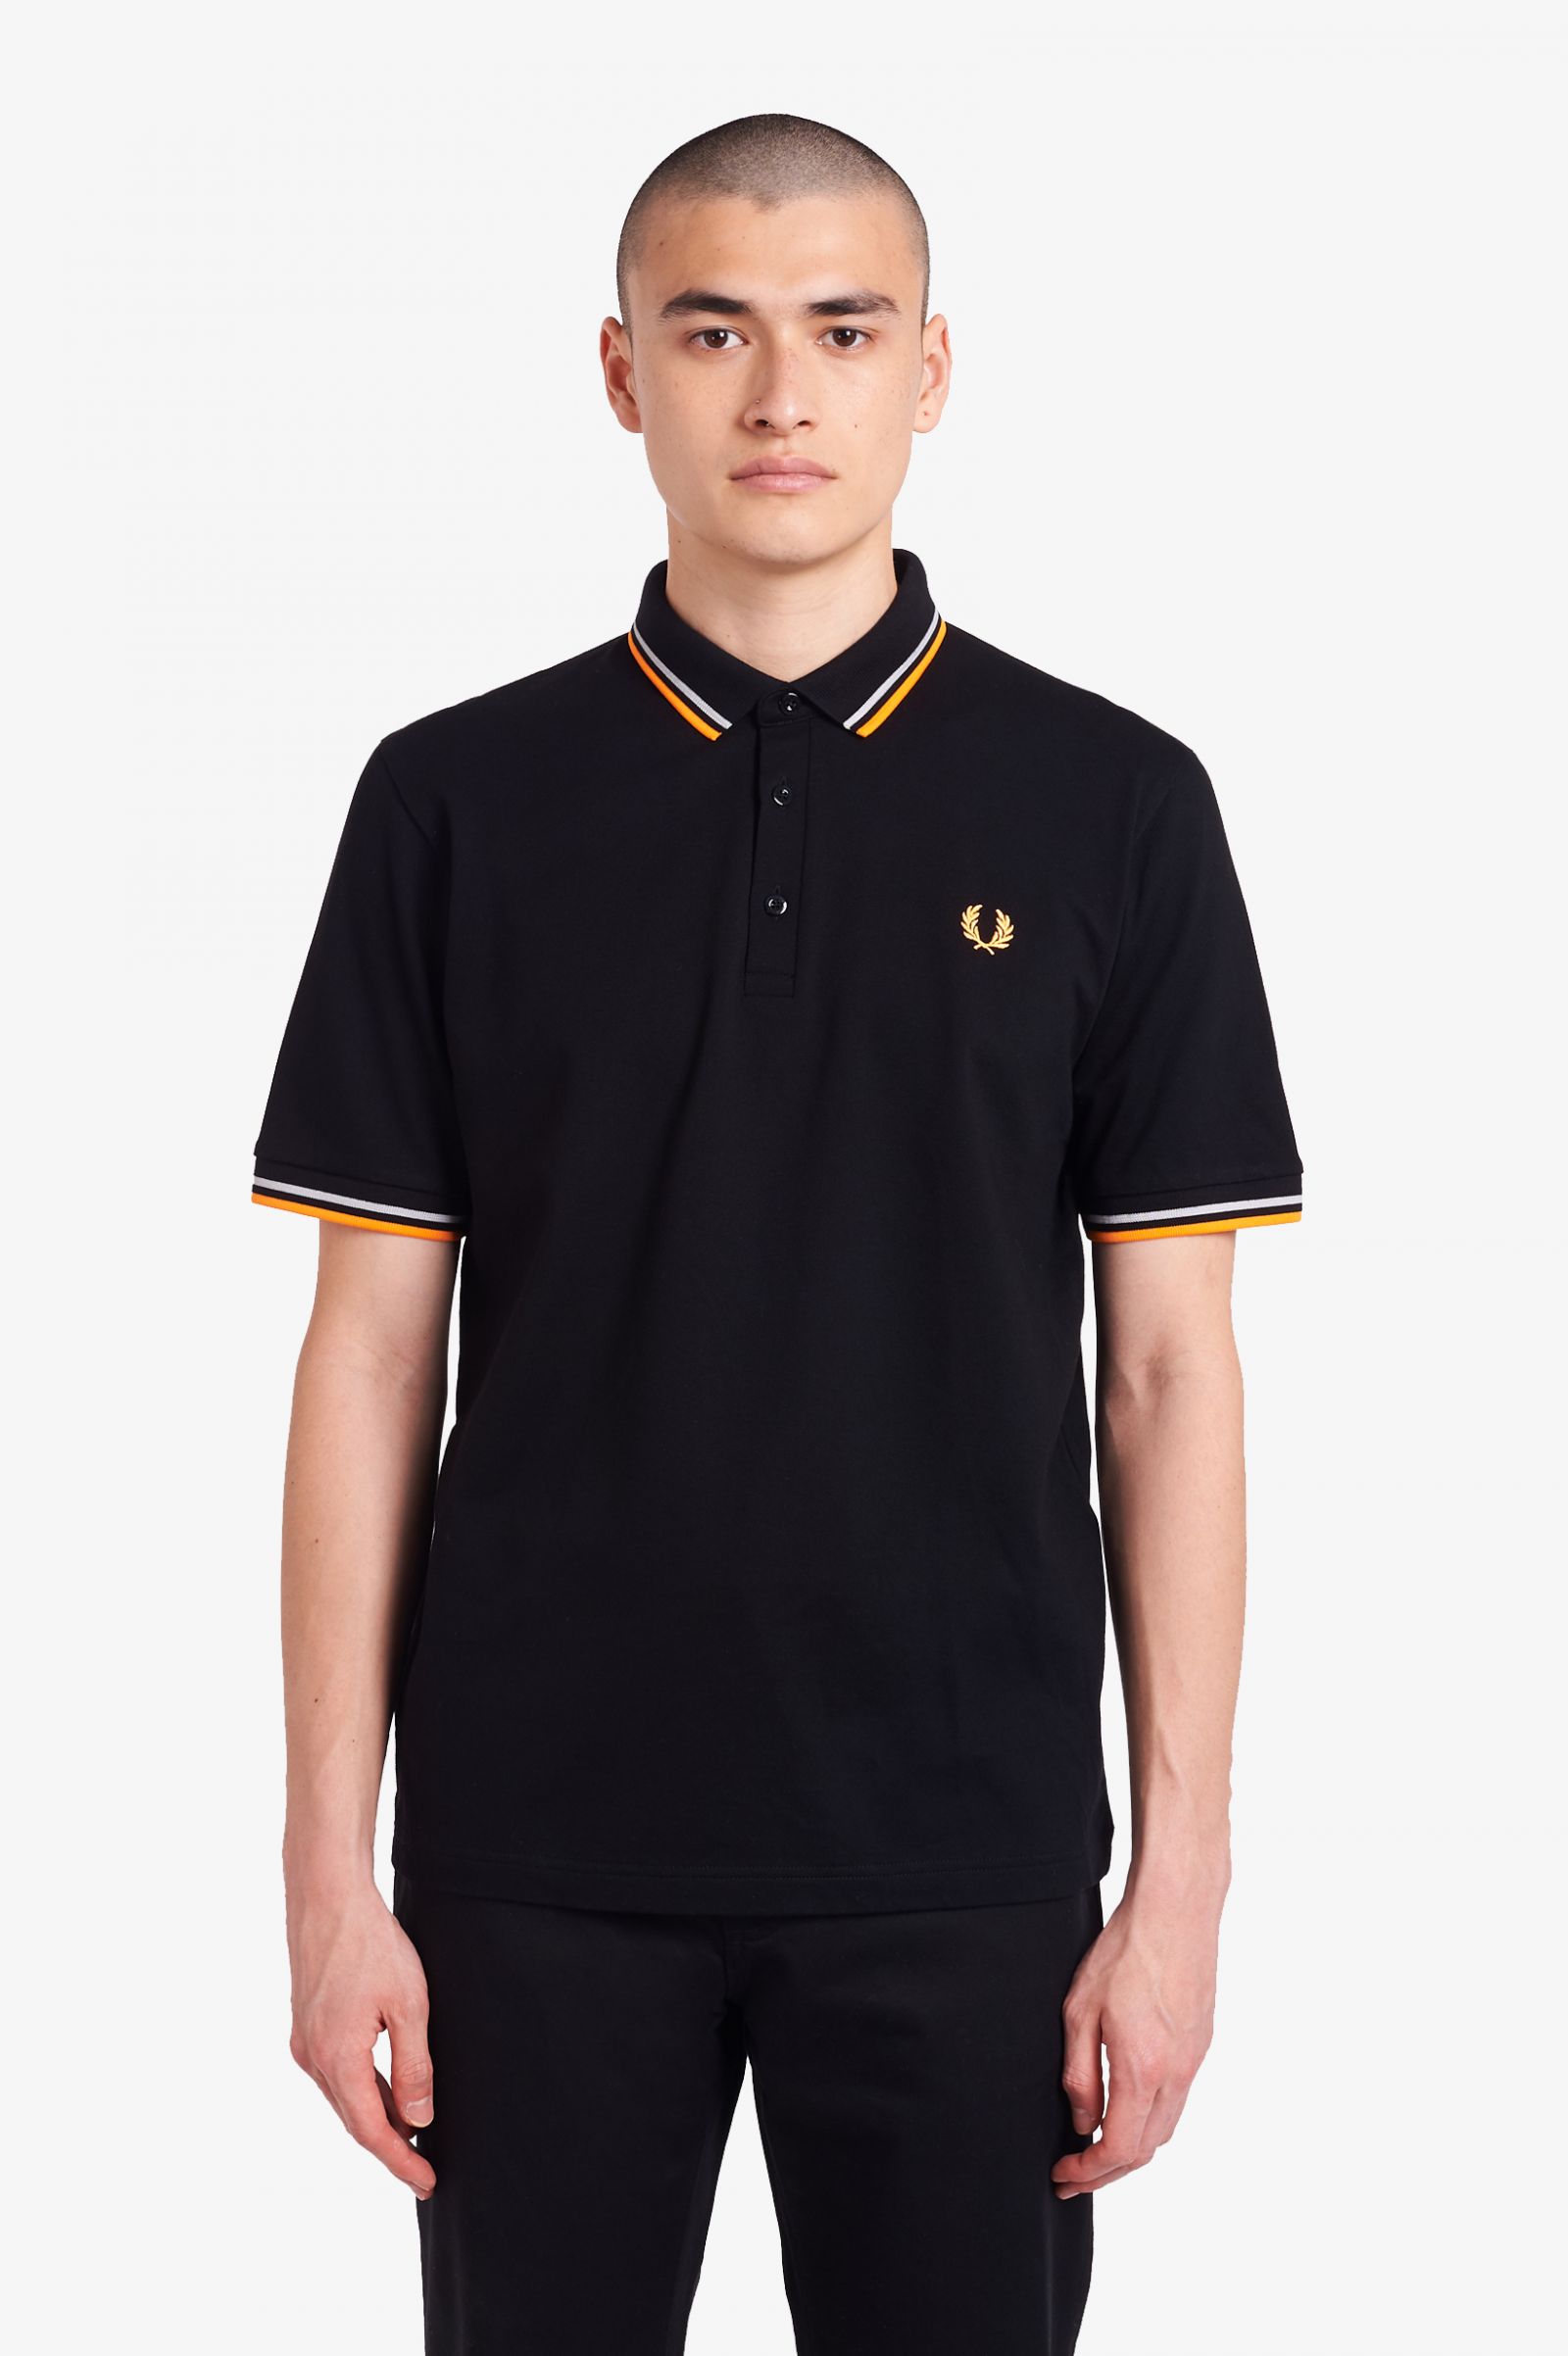 Made In Japan Polo Shirt - Black | Made in Japan Collection | Polos ...